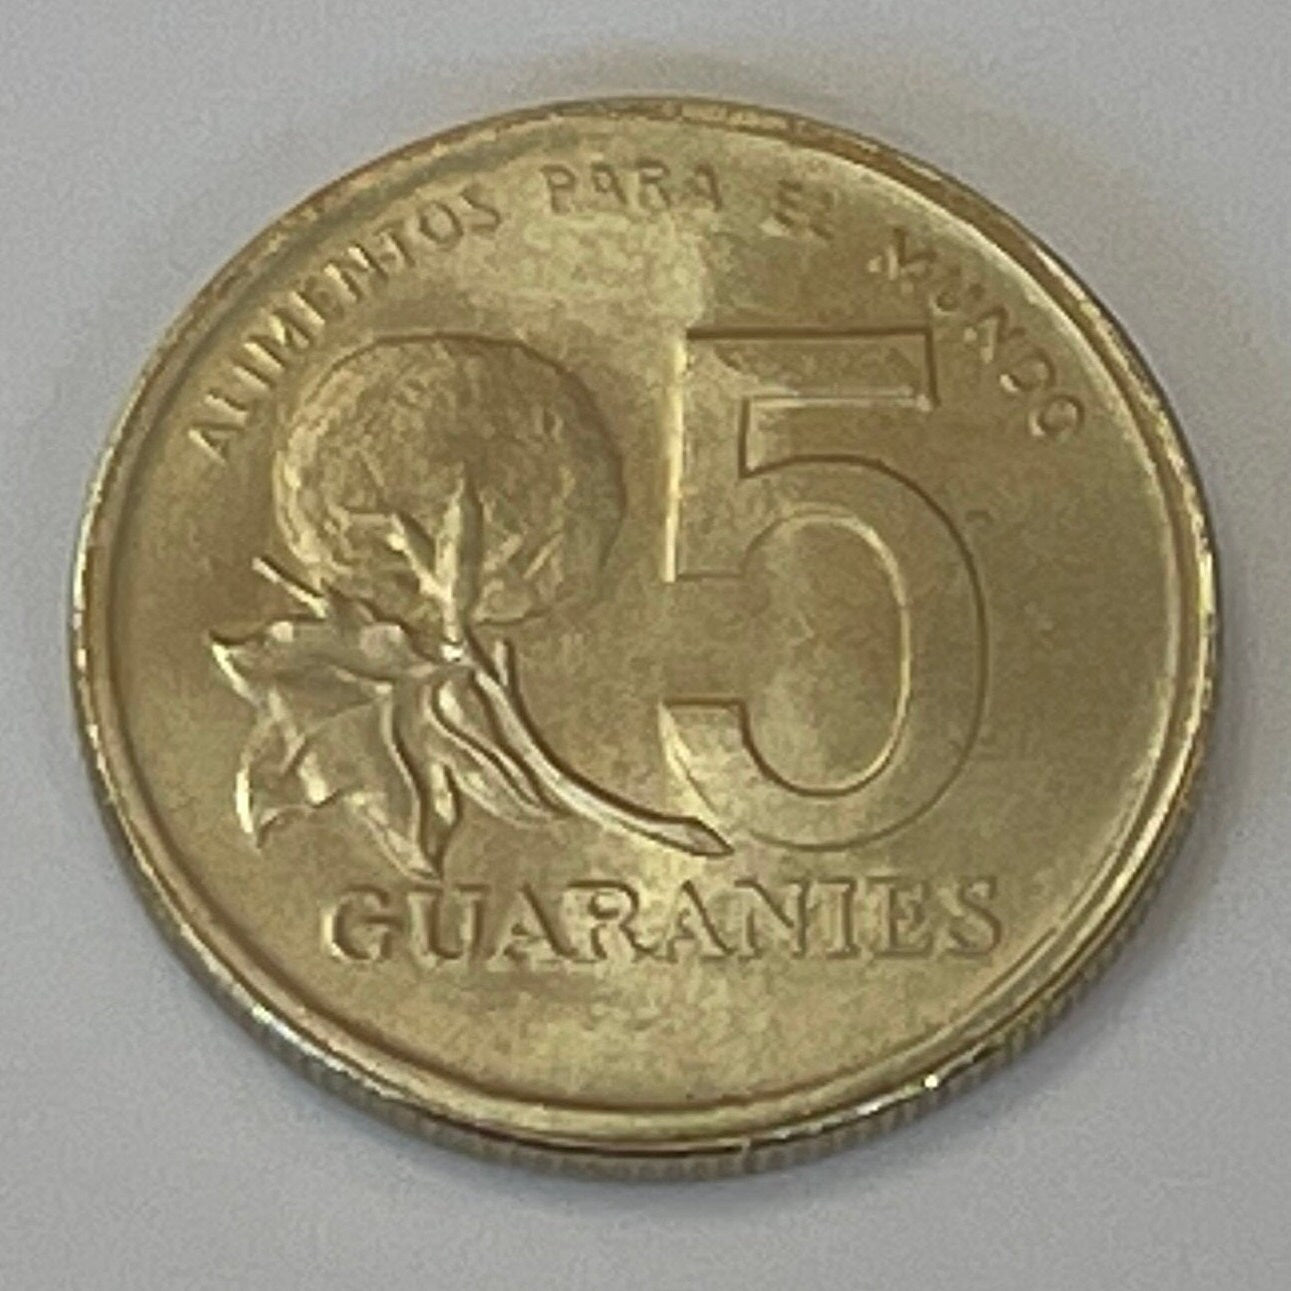 Woman w/Jug 5 Guaranies Paraguay Authentic Coin Money for Jewelry and Craft Making (Cotton Plant)